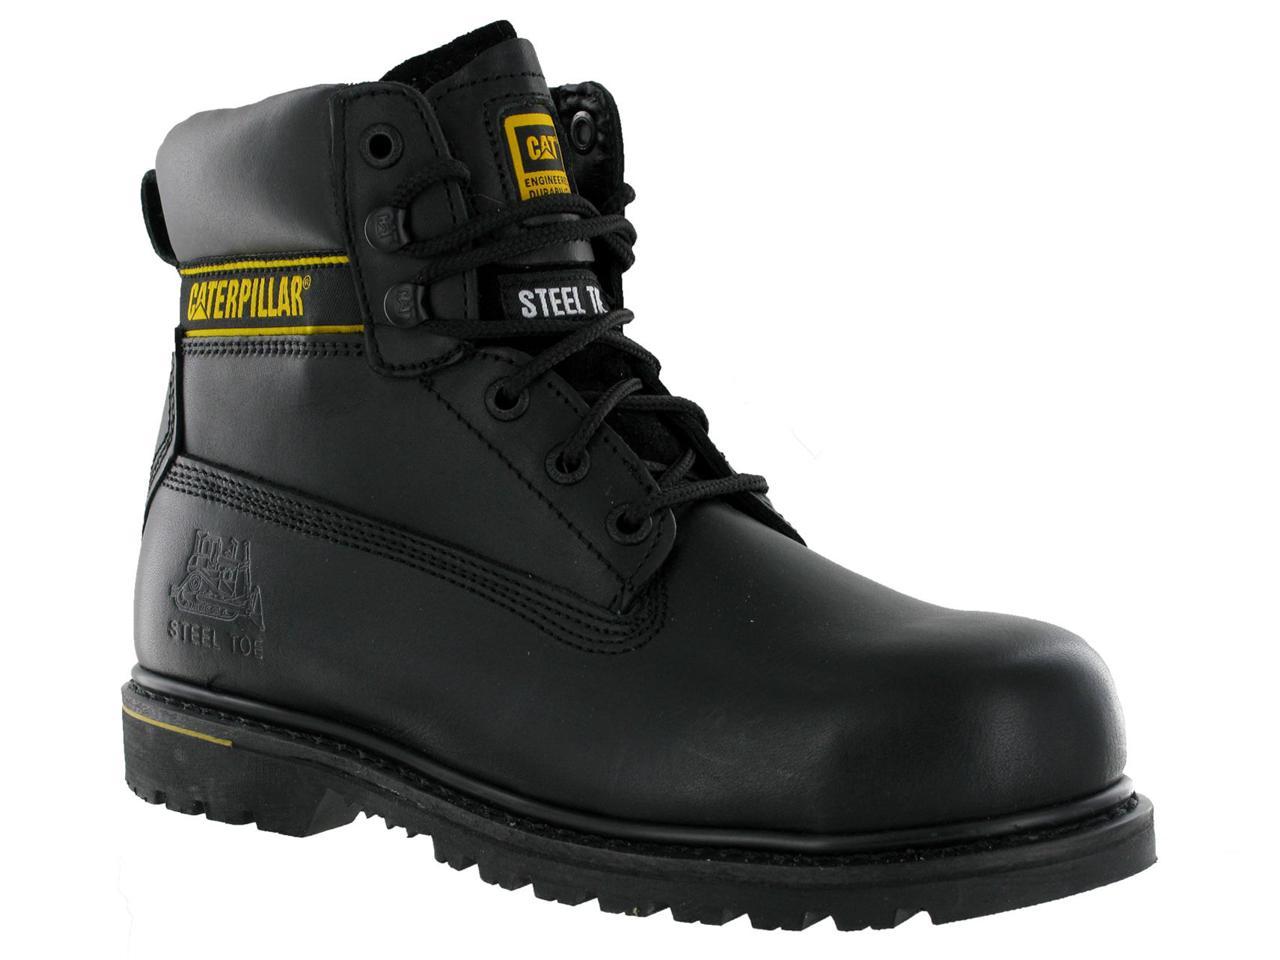 Caterpillar Holton Mens Honey/Yellow SB Safety Steel Toe Cap Lace Up Work Boots 